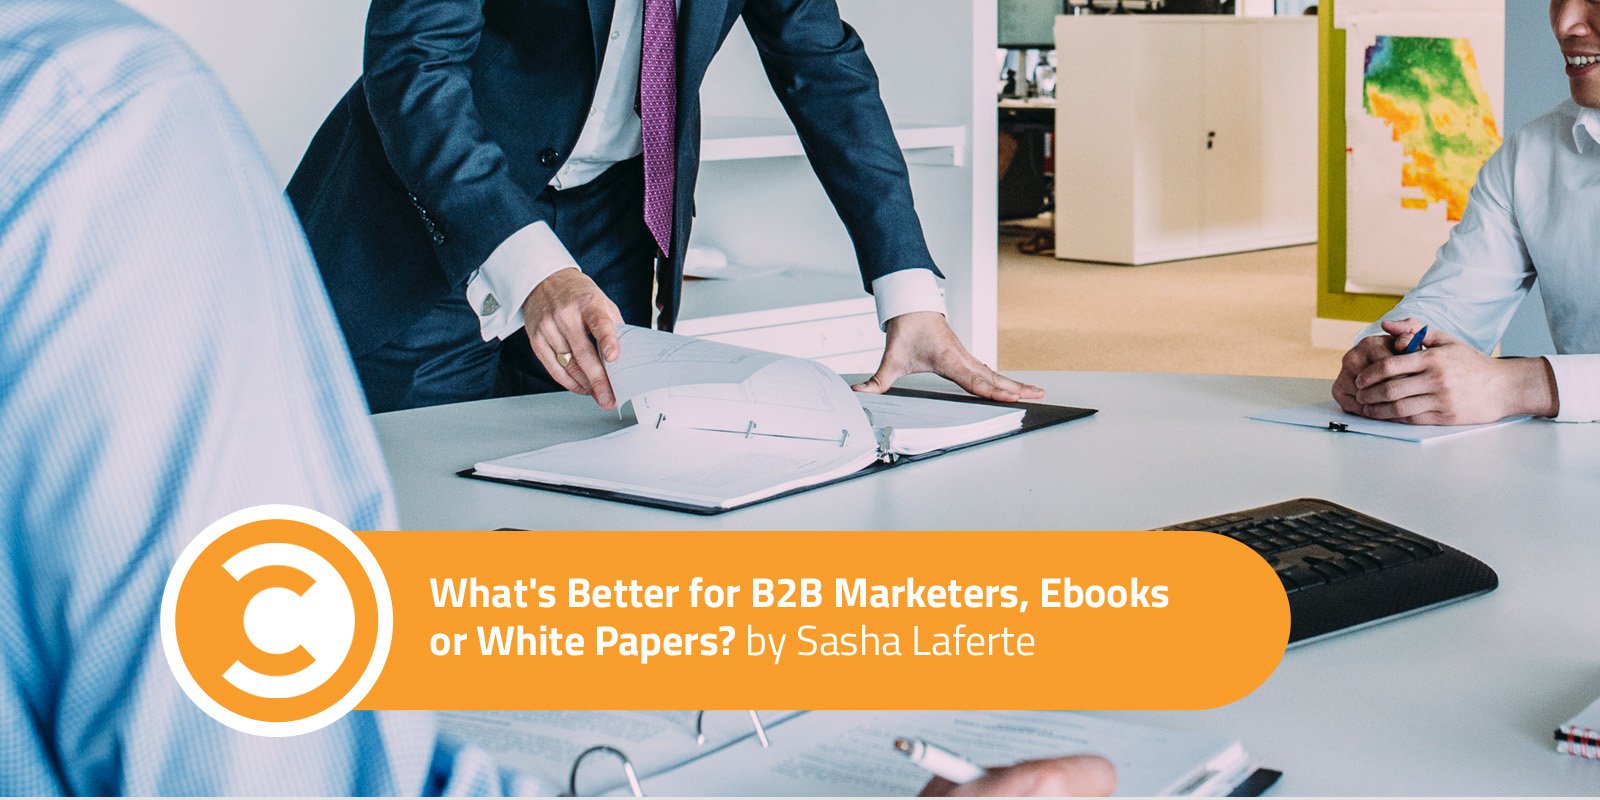 What's Better for B2B Marketers, Ebooks or White Papers